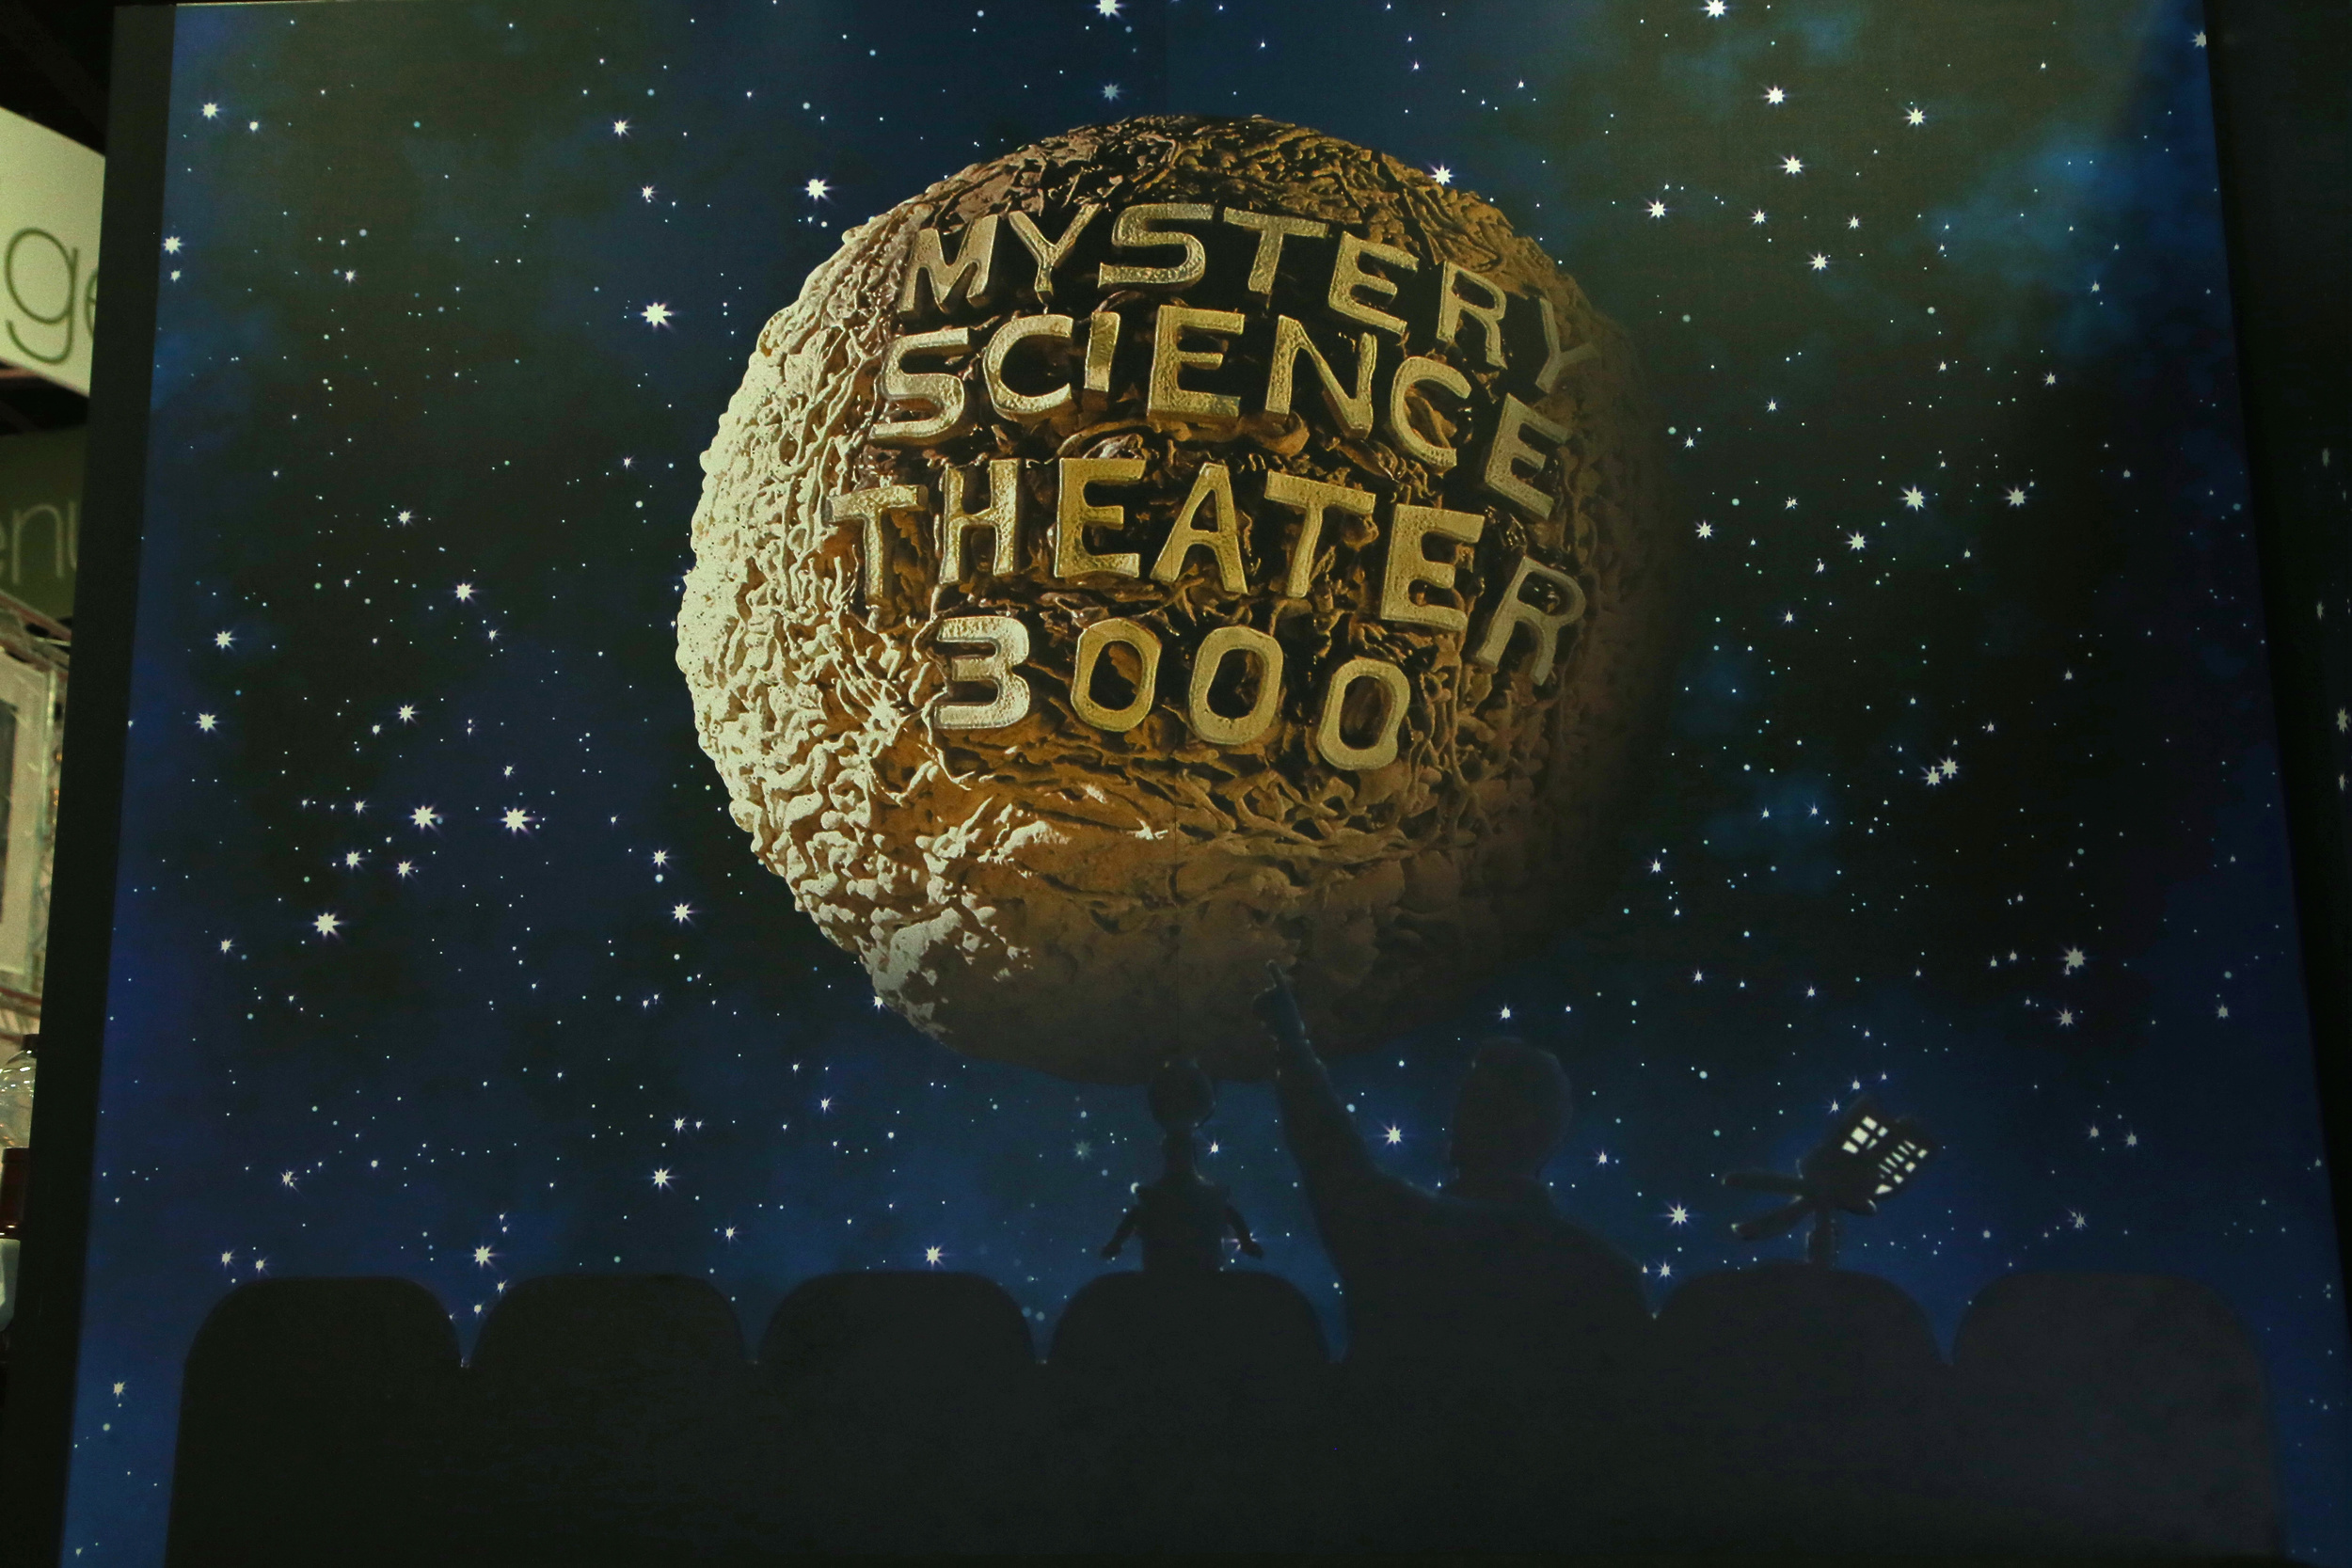 <p>In the not-too-distant future, a man and some robots sat in space and made fun of cheesy movies. That is the simple premise of “Mystery Science Theater 3000.” However, the show, a cult classic, mined so much glorious comedy out of that. Whether it was Joel, Mike, or, in the Netflix reboot, Jonah, our host, along with Crow T. Robot and Tom Servo, pumped out joke after joke over movies that are often laughable in and of themselves. There are over 200 episodes of “MST3K” out there, but which are the best of the best? Here, in order, are the top 25 episodes from the many lives of “Mystery Science Theater 3000.” If you disagree, repeat to yourself it’s just a list and you should really just relax.</p><p>If you want to watch the show, some classic episodes, plus the two Netflix seasons, are available for streaming. The app Pluto TV has an entire channel dedicated to showing “MST3K,” and Comet, an over-the-air channel, shows episodes on some nights. In a pinch, though, the folks who created the show were big on encouraging fans to record episodes and, in their words, “circulate the tapes.” As such, almost every episode can be found on YouTube. In fact, the official “MST3K” YouTube channel has full episodes available to watch, including five from this list.</p>